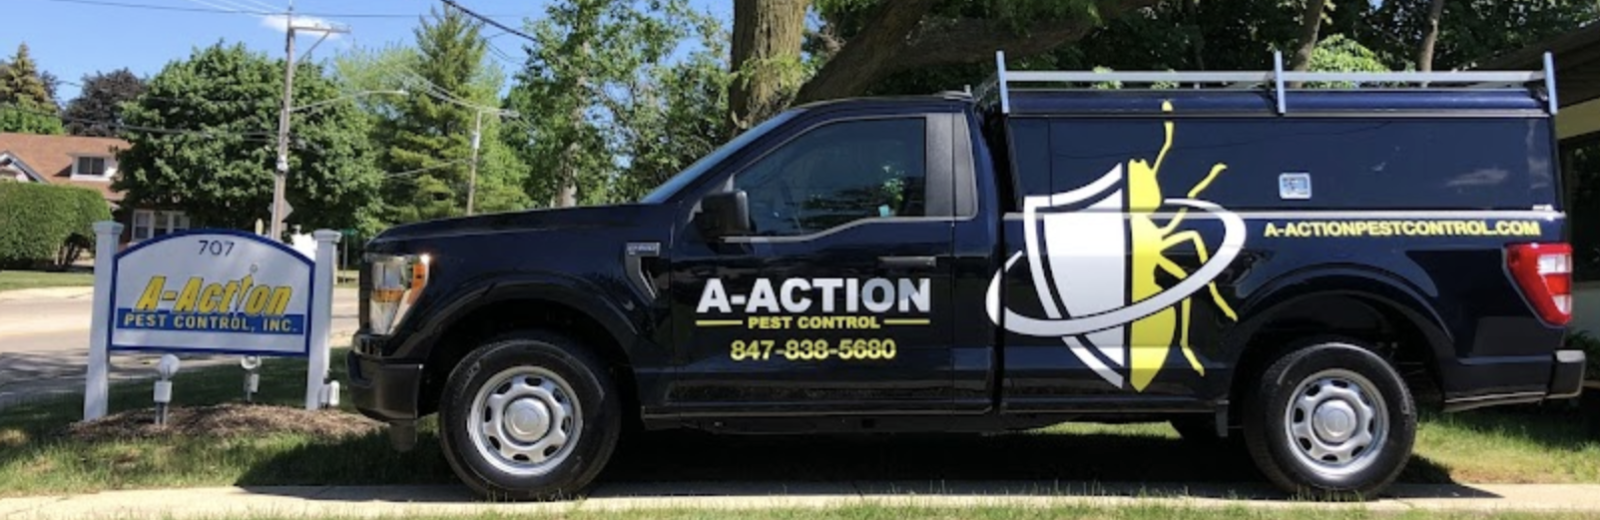 a-action pest control truck 